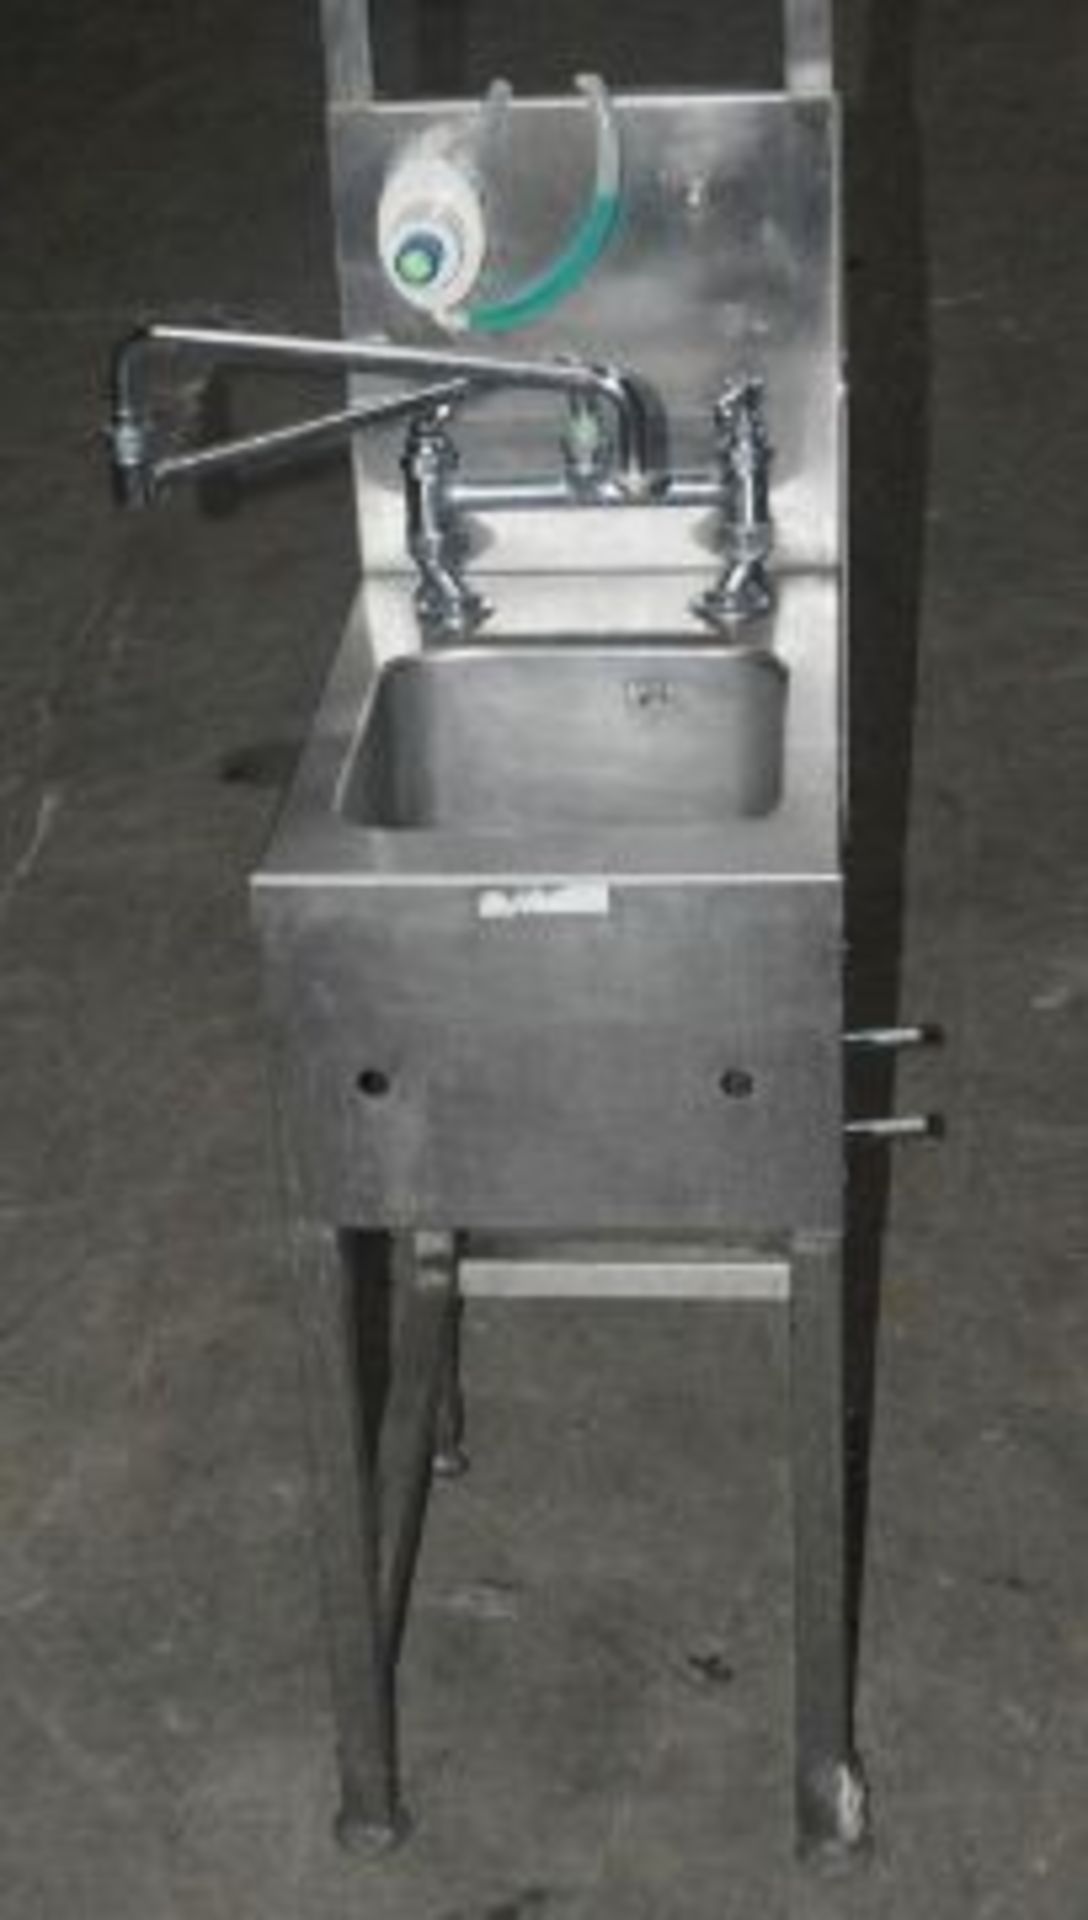 1 x Stainless Steel Commercial Kitchen Janitorial Mop / Cleaning Station - Dimensions: H187 x W33 - Image 4 of 5